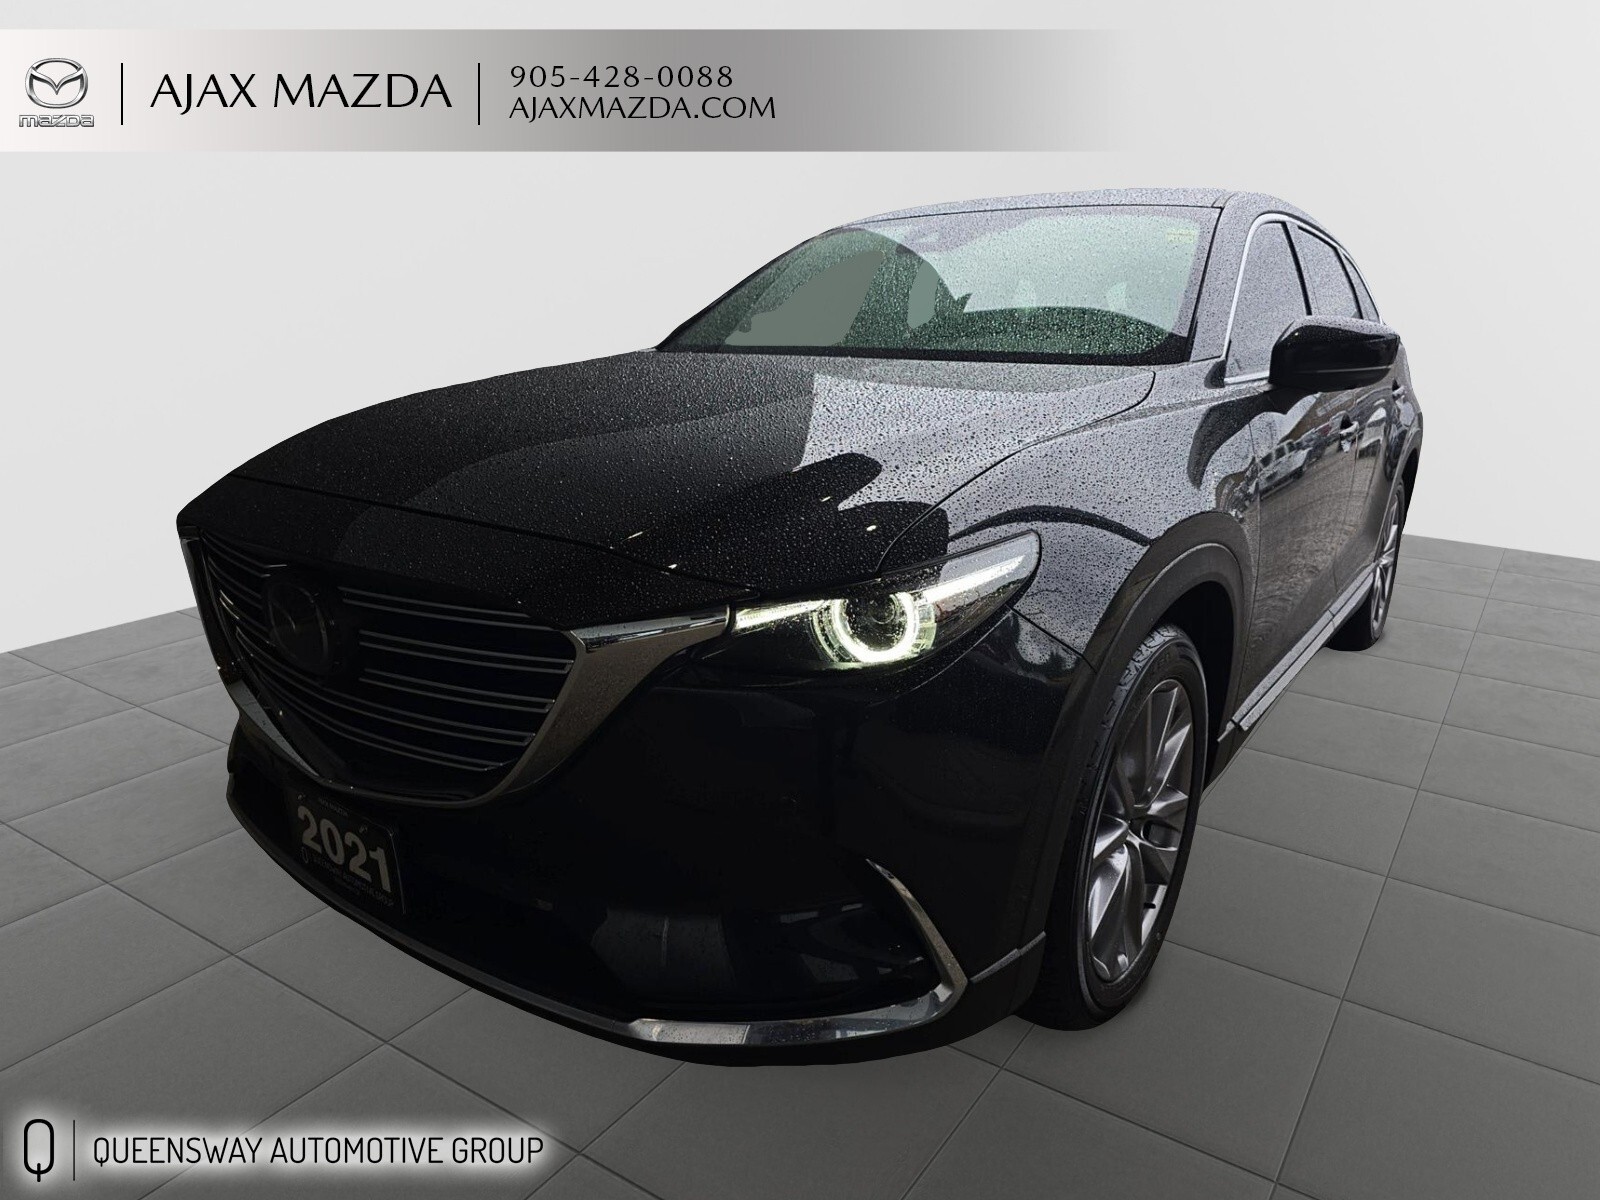 2021 Mazda CX-9 CERTIFIED PRE-OWNED, RATES START AT 4.6%